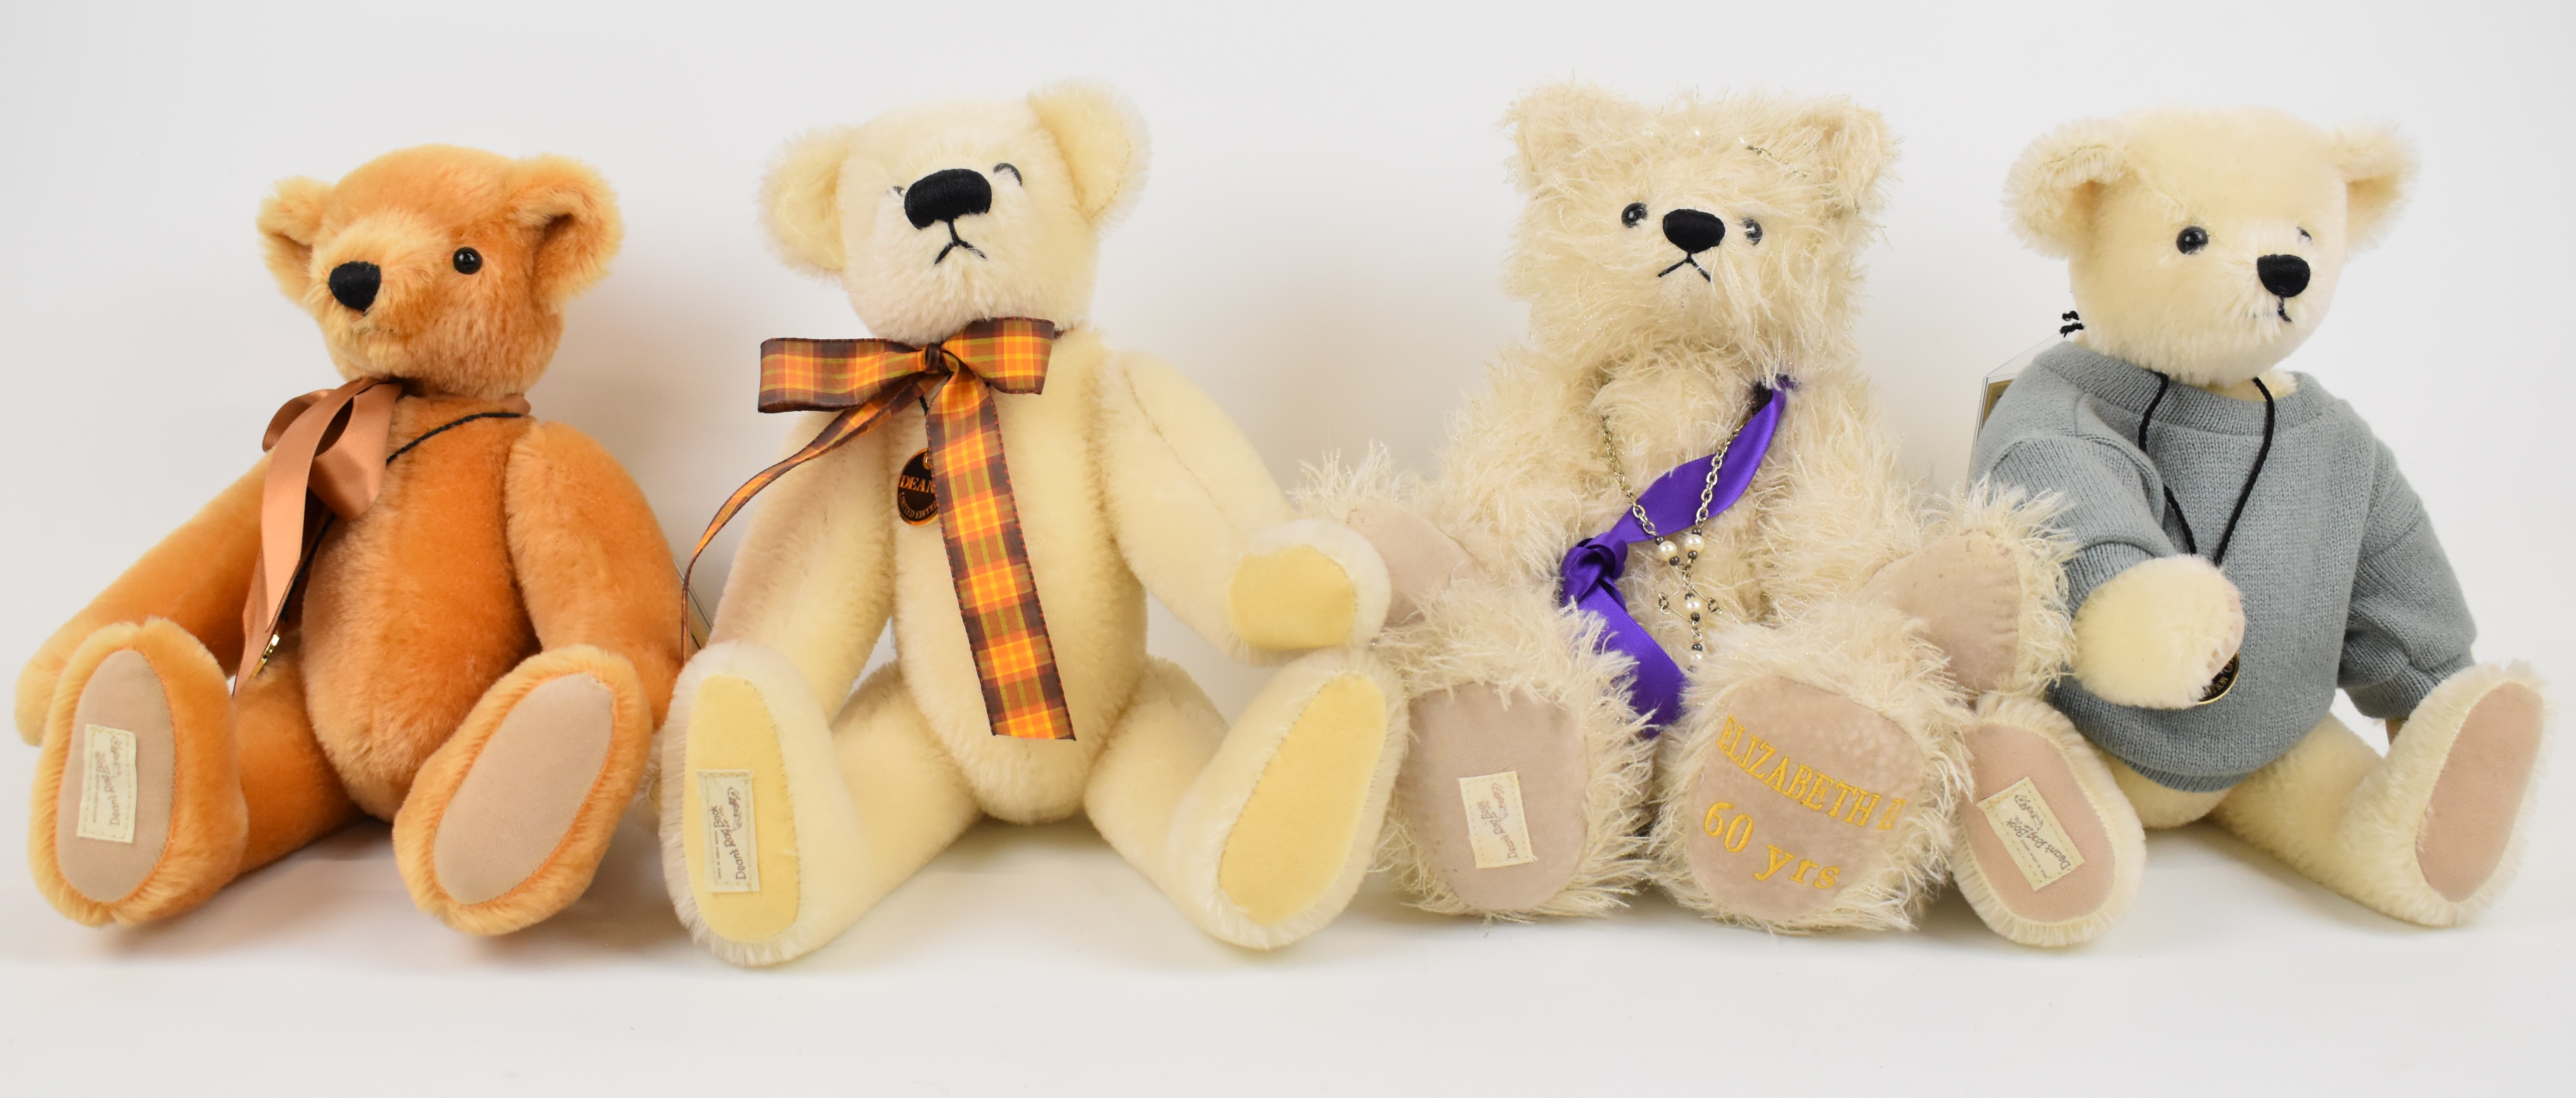 Thirteen Deans Rag Book limited edition Teddy bears, most with original tags and labels to include - Image 5 of 12